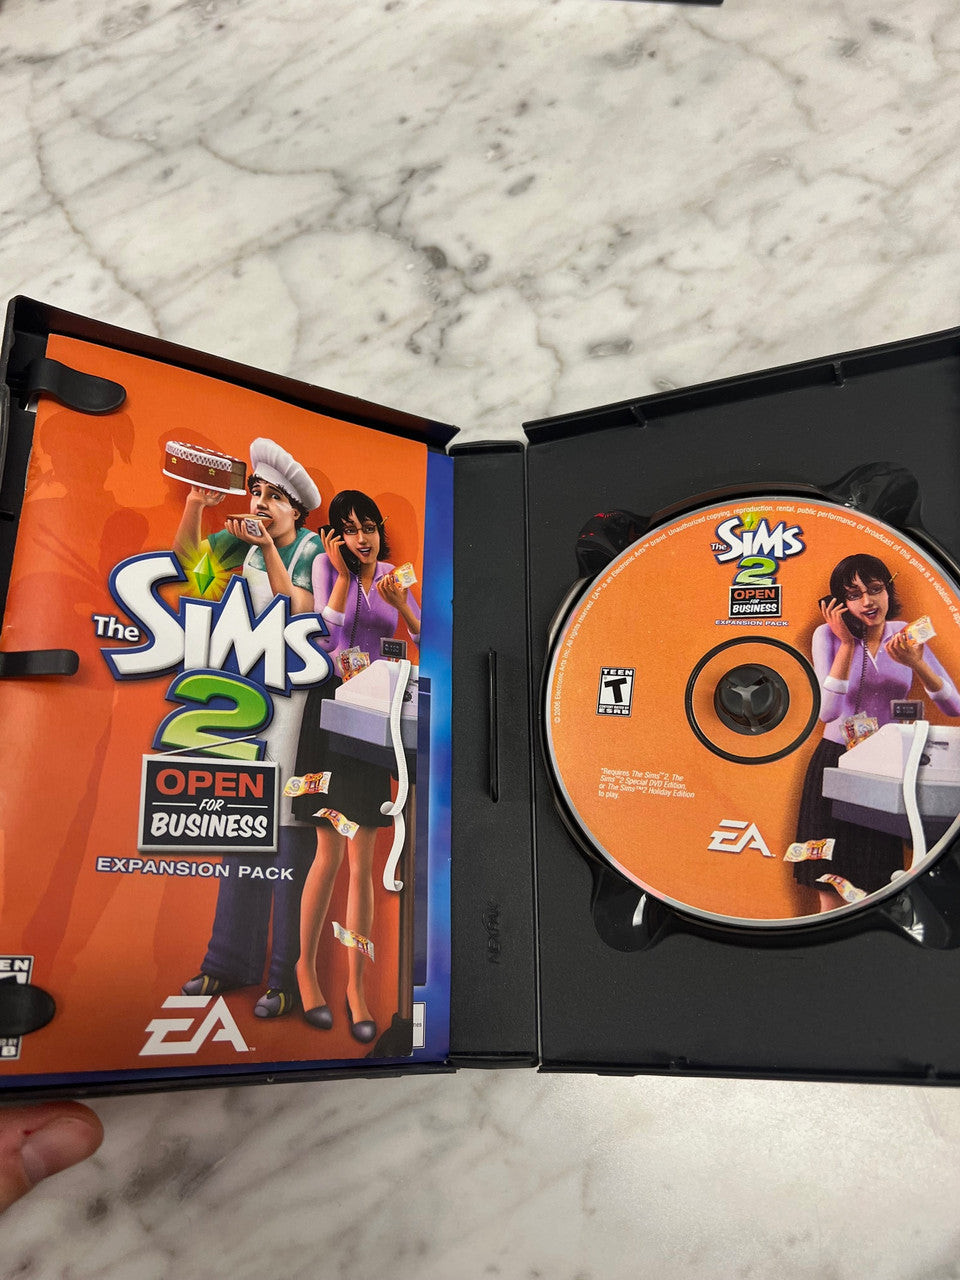 Sims 2 Open for Business Expansion Pack PC CD-ROM Video Game Complete in Case